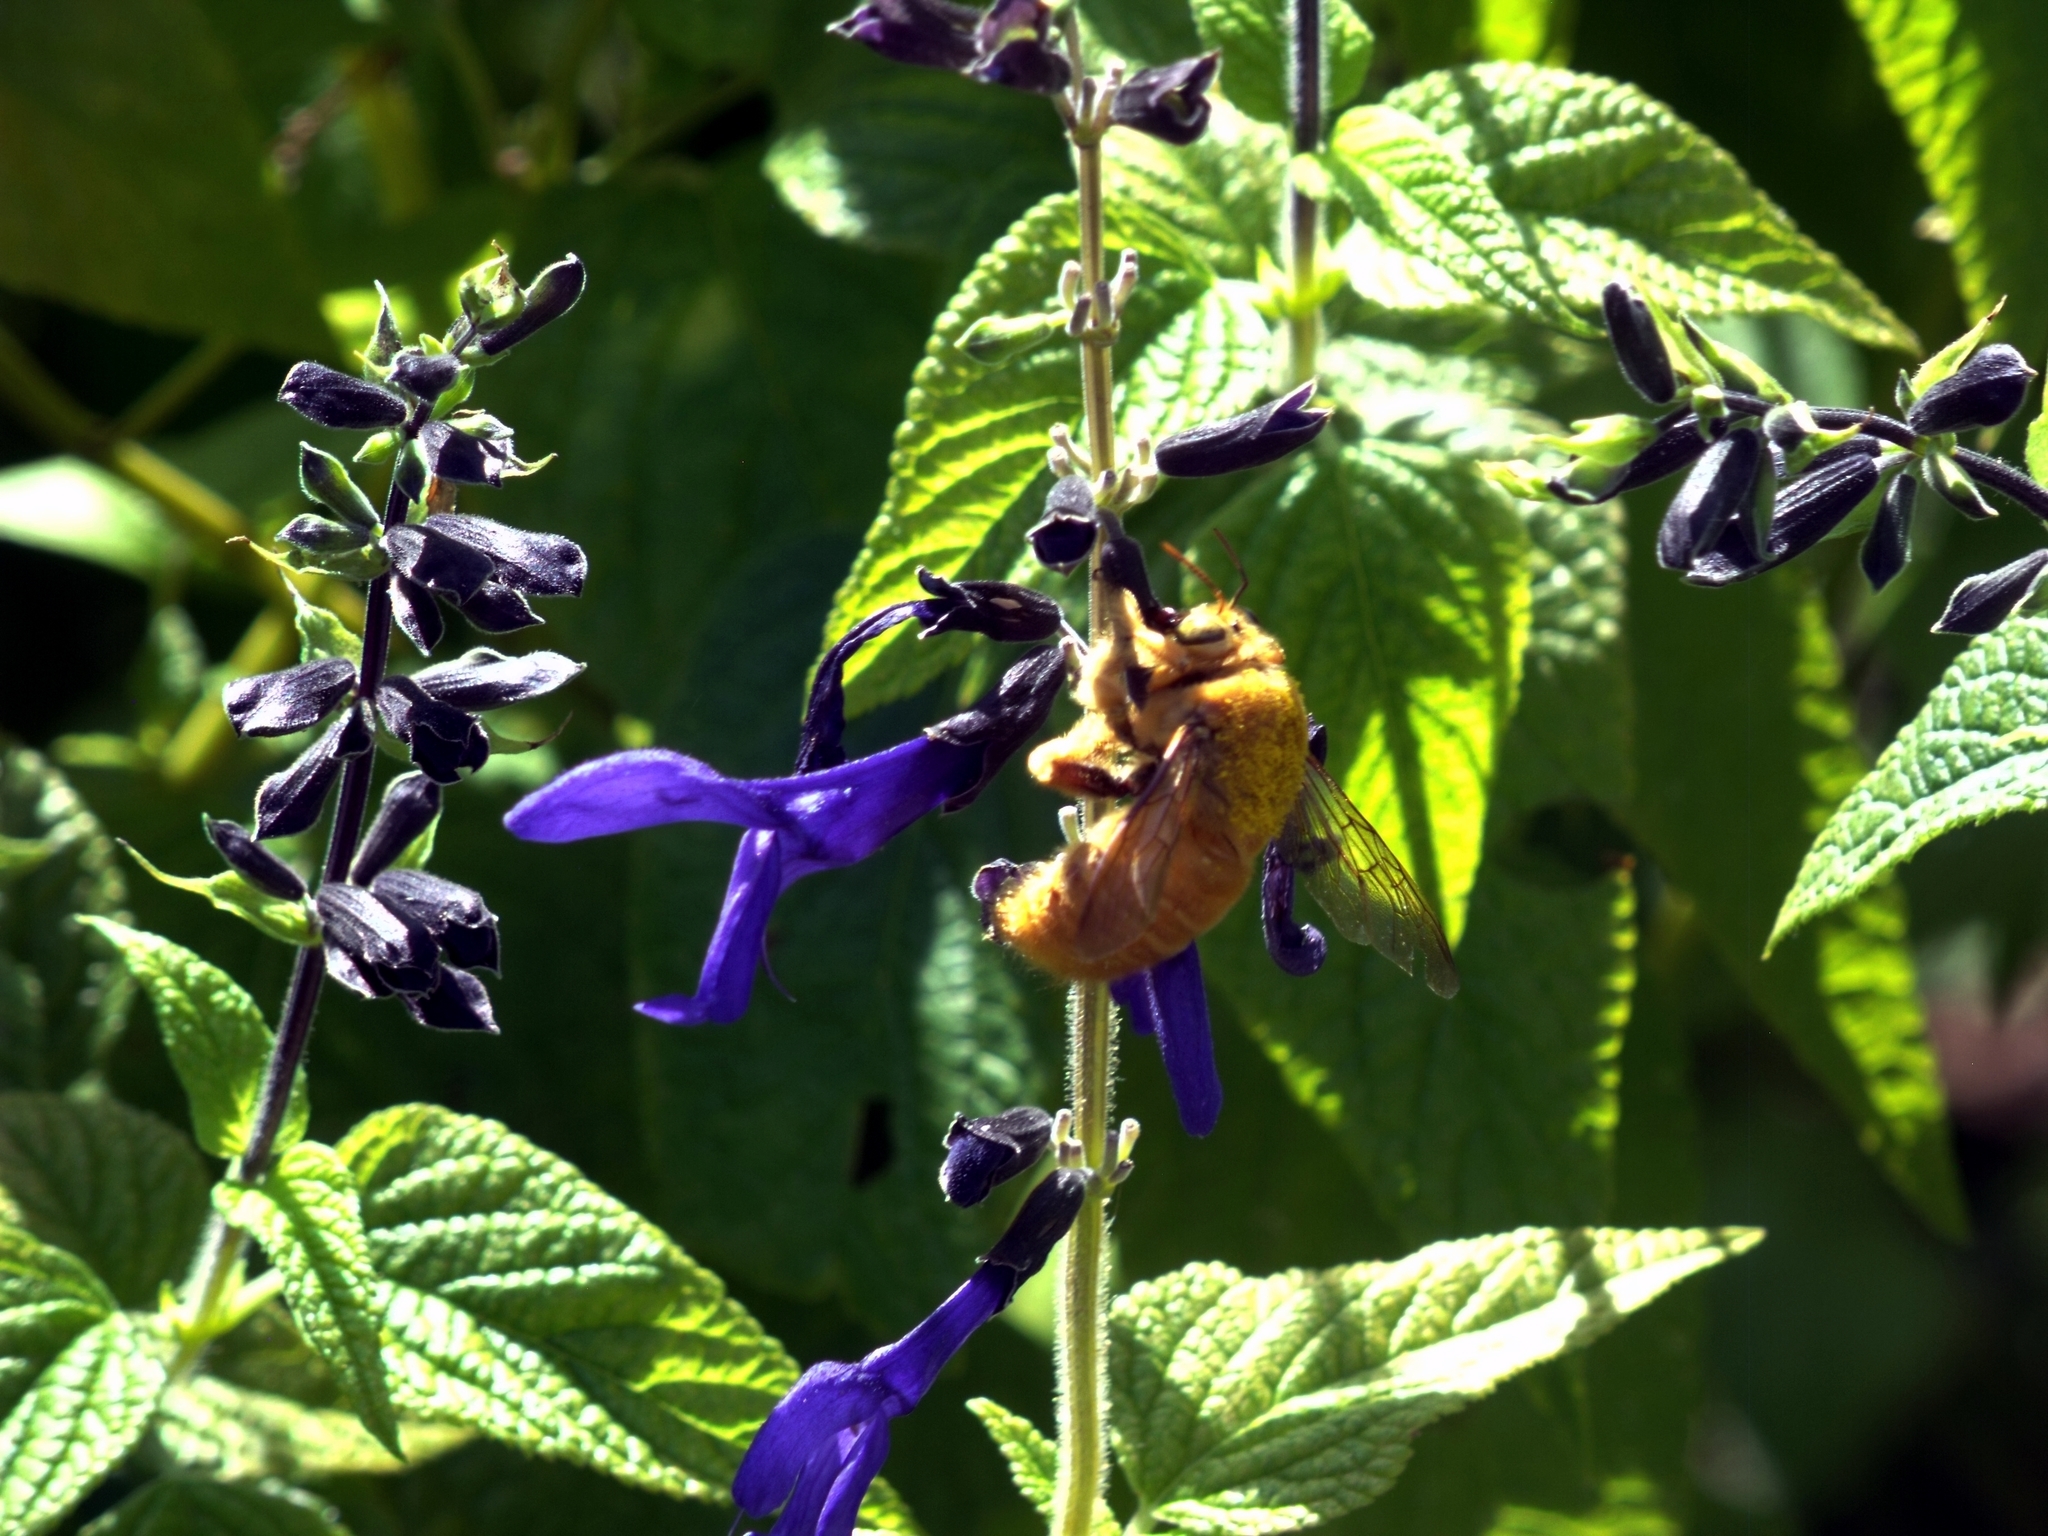 Image of Valley Carpenter Bee